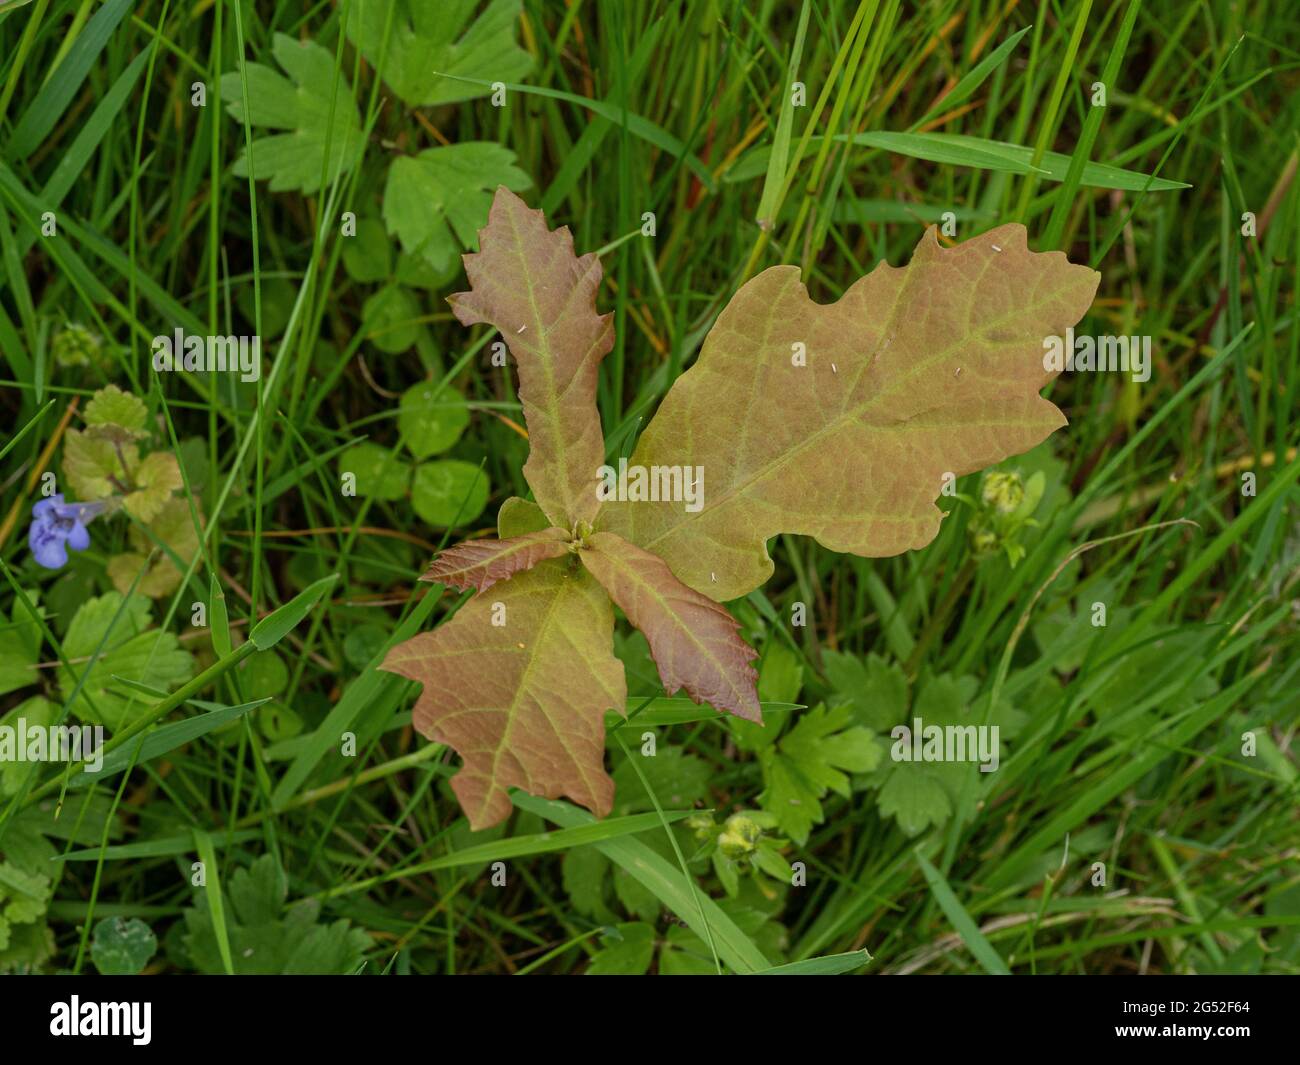 A close up of a young oak seedling growing through a mixed grass background Stock Photo